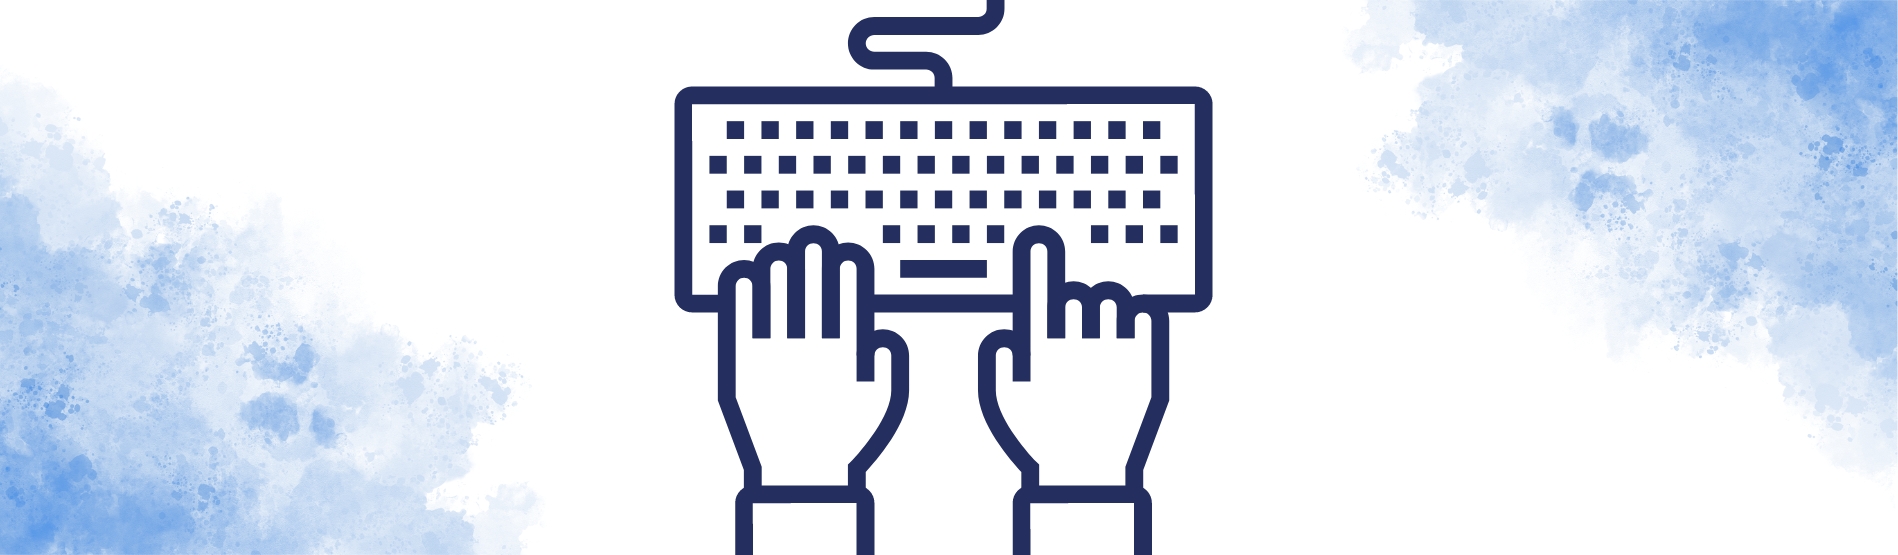 Icon of hands typing on a keyboard